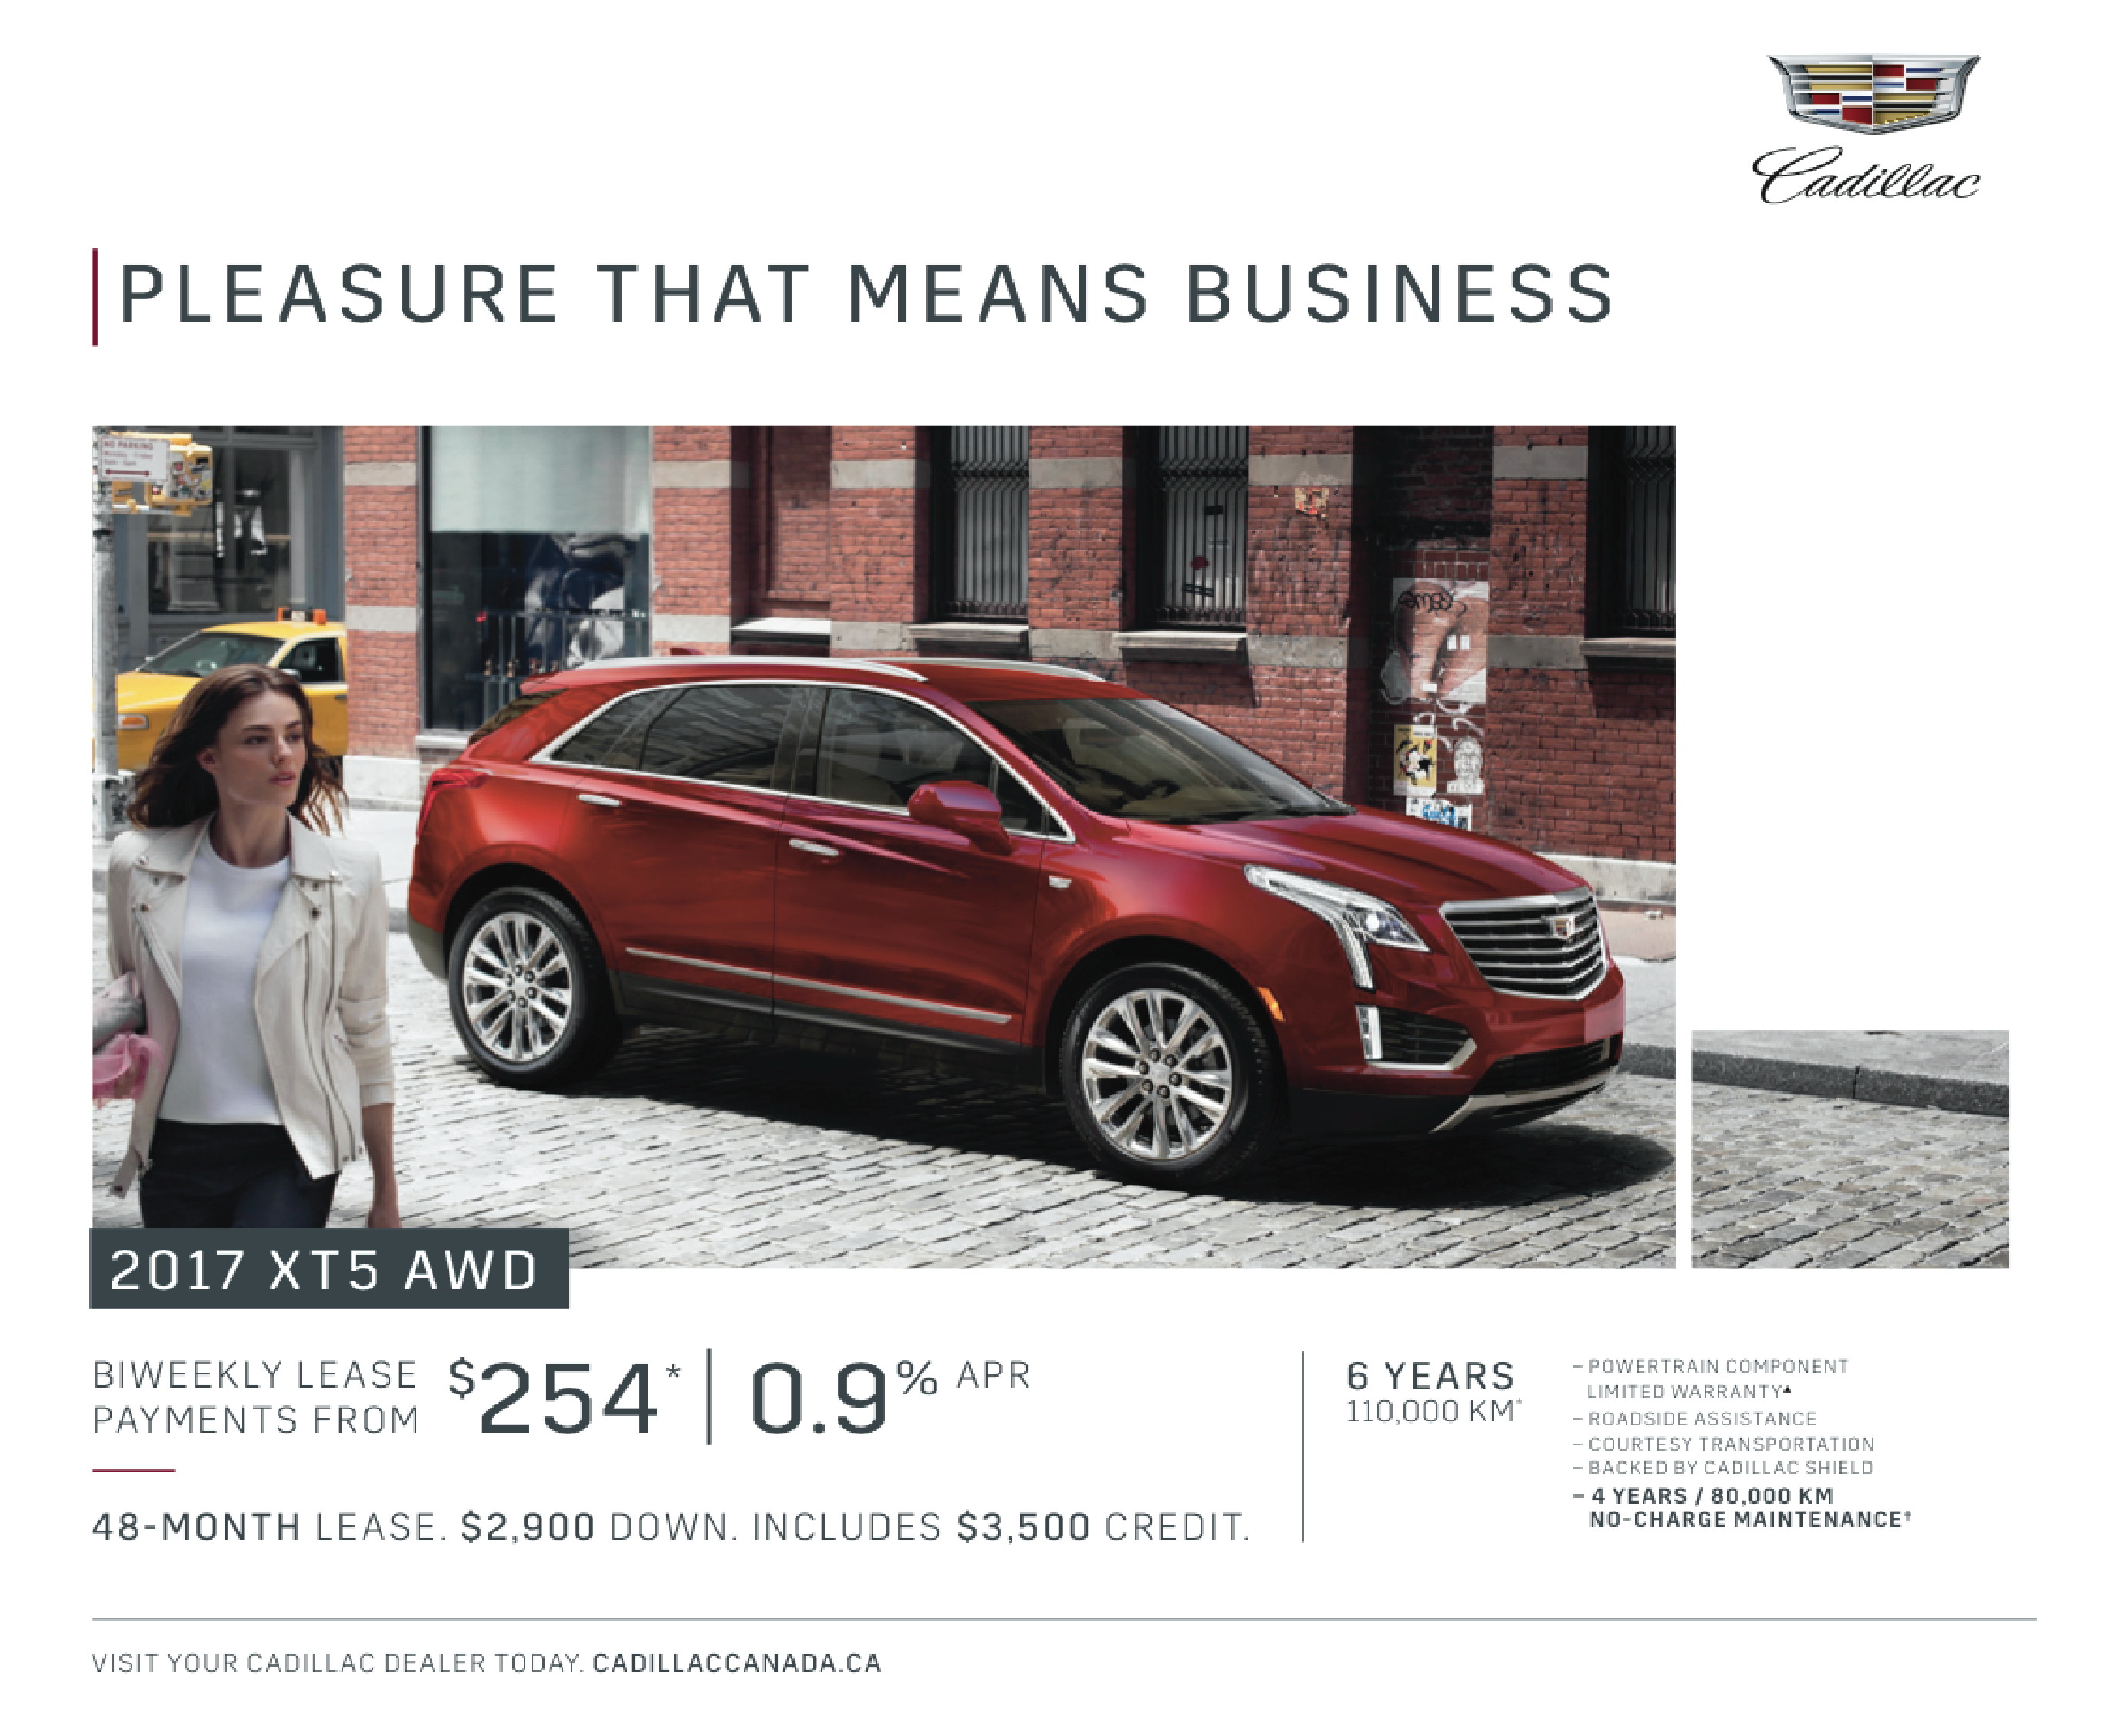 Cadillac pleasure that means business crop